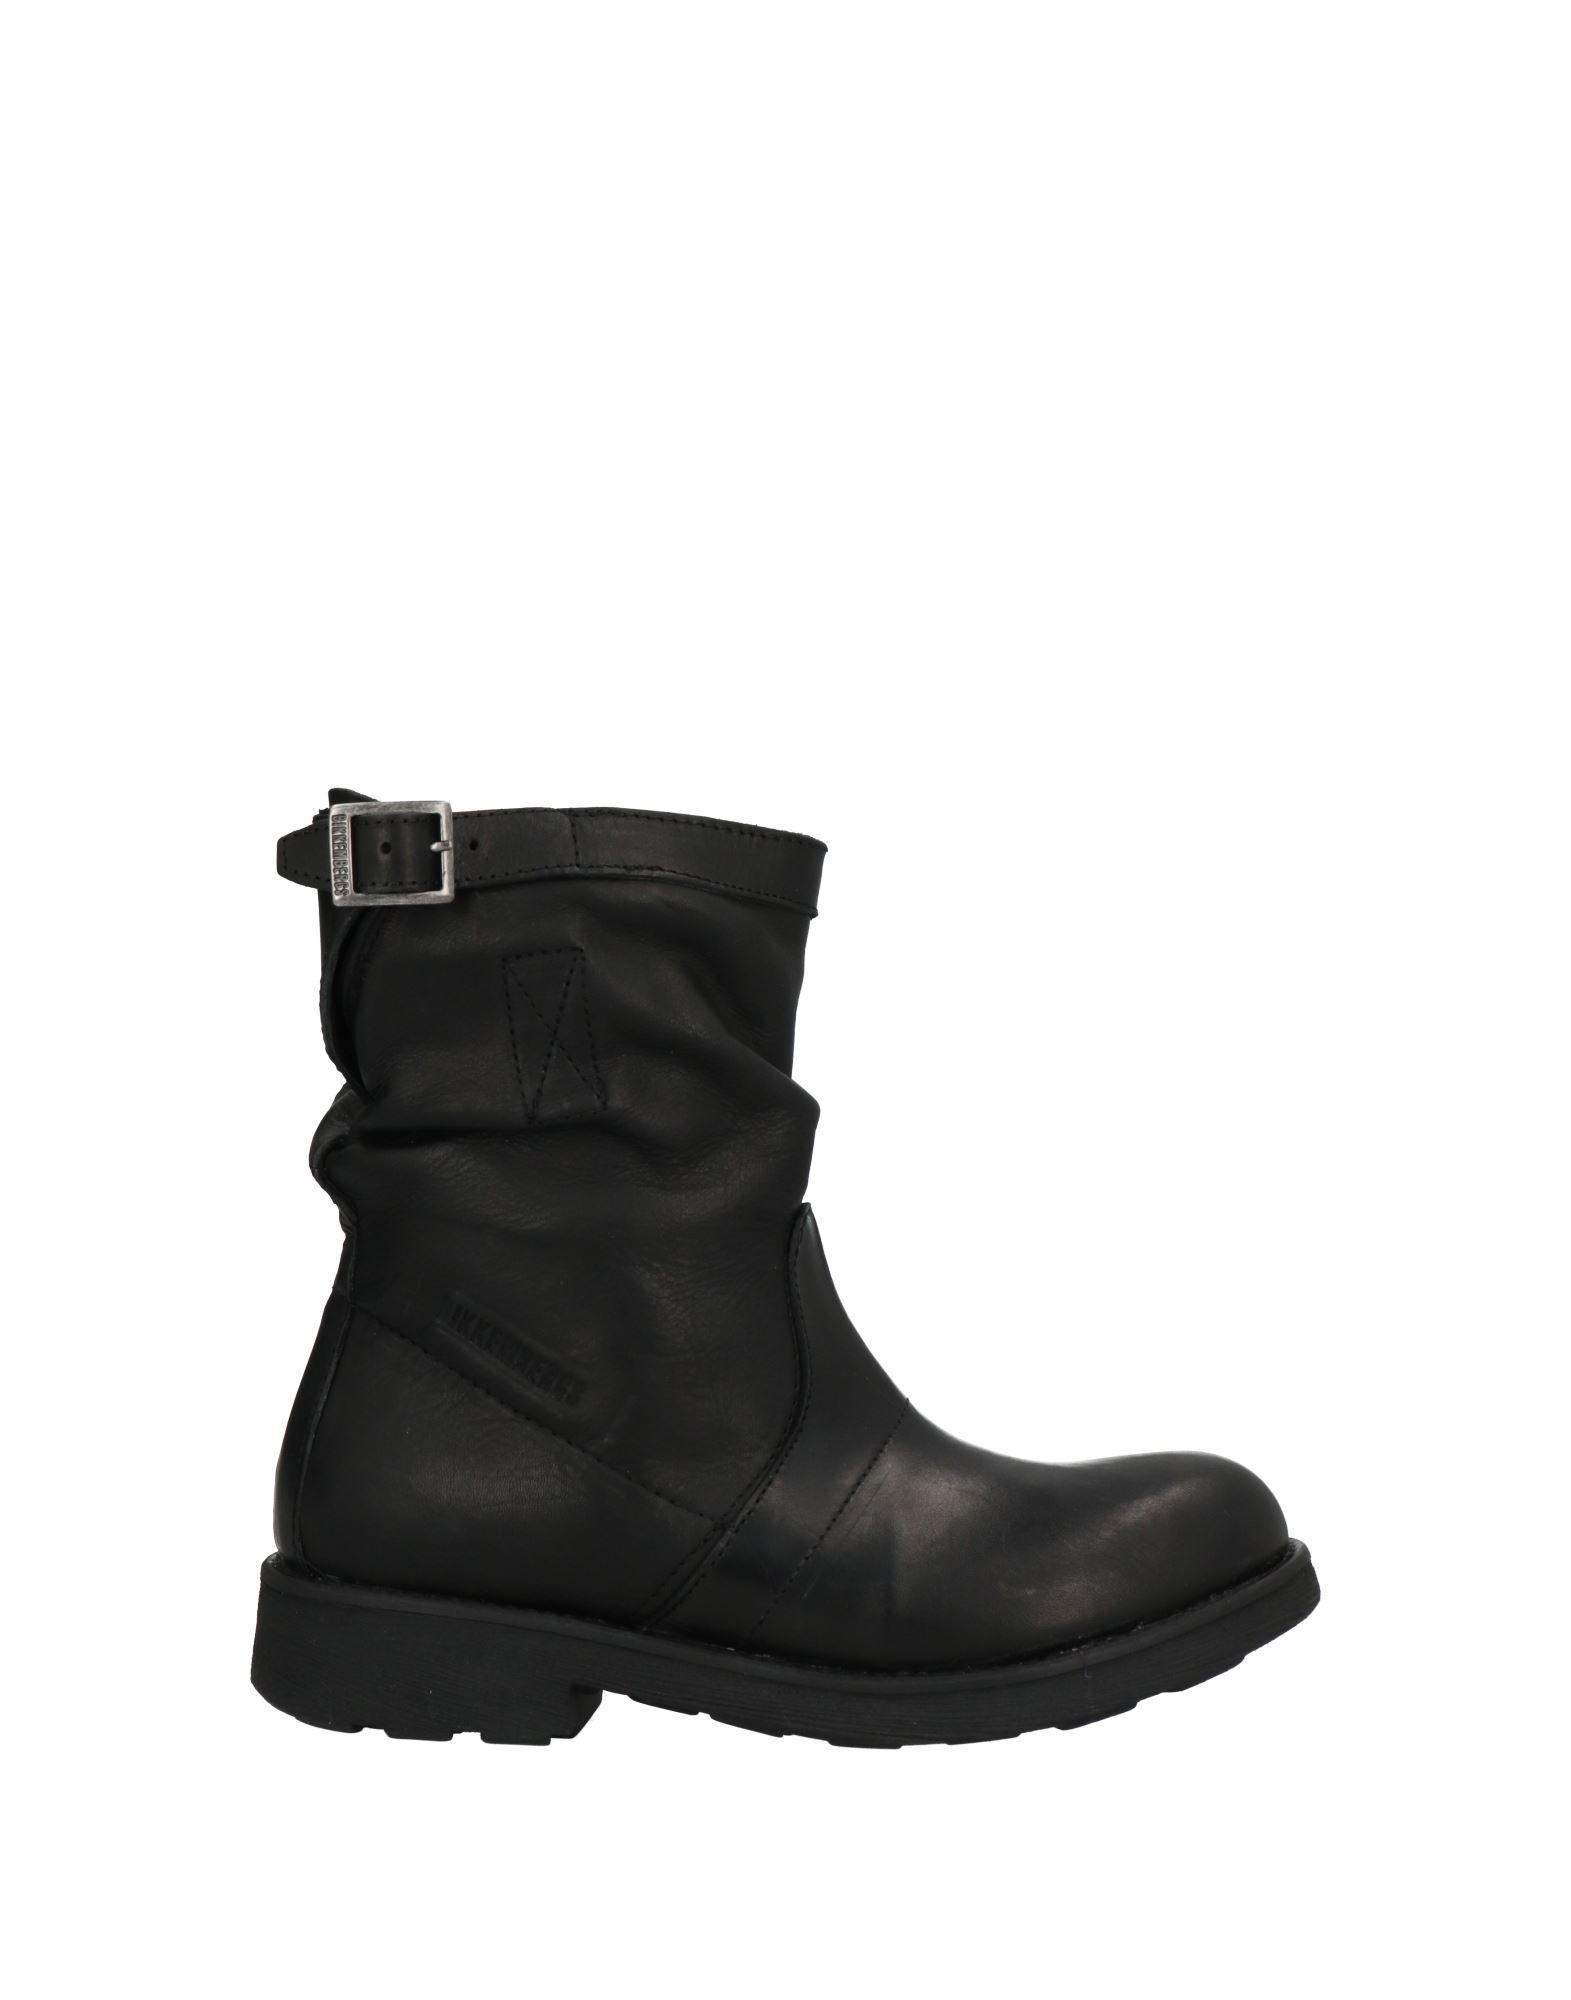 Bikkembergs Ankle Boots in Black | Lyst